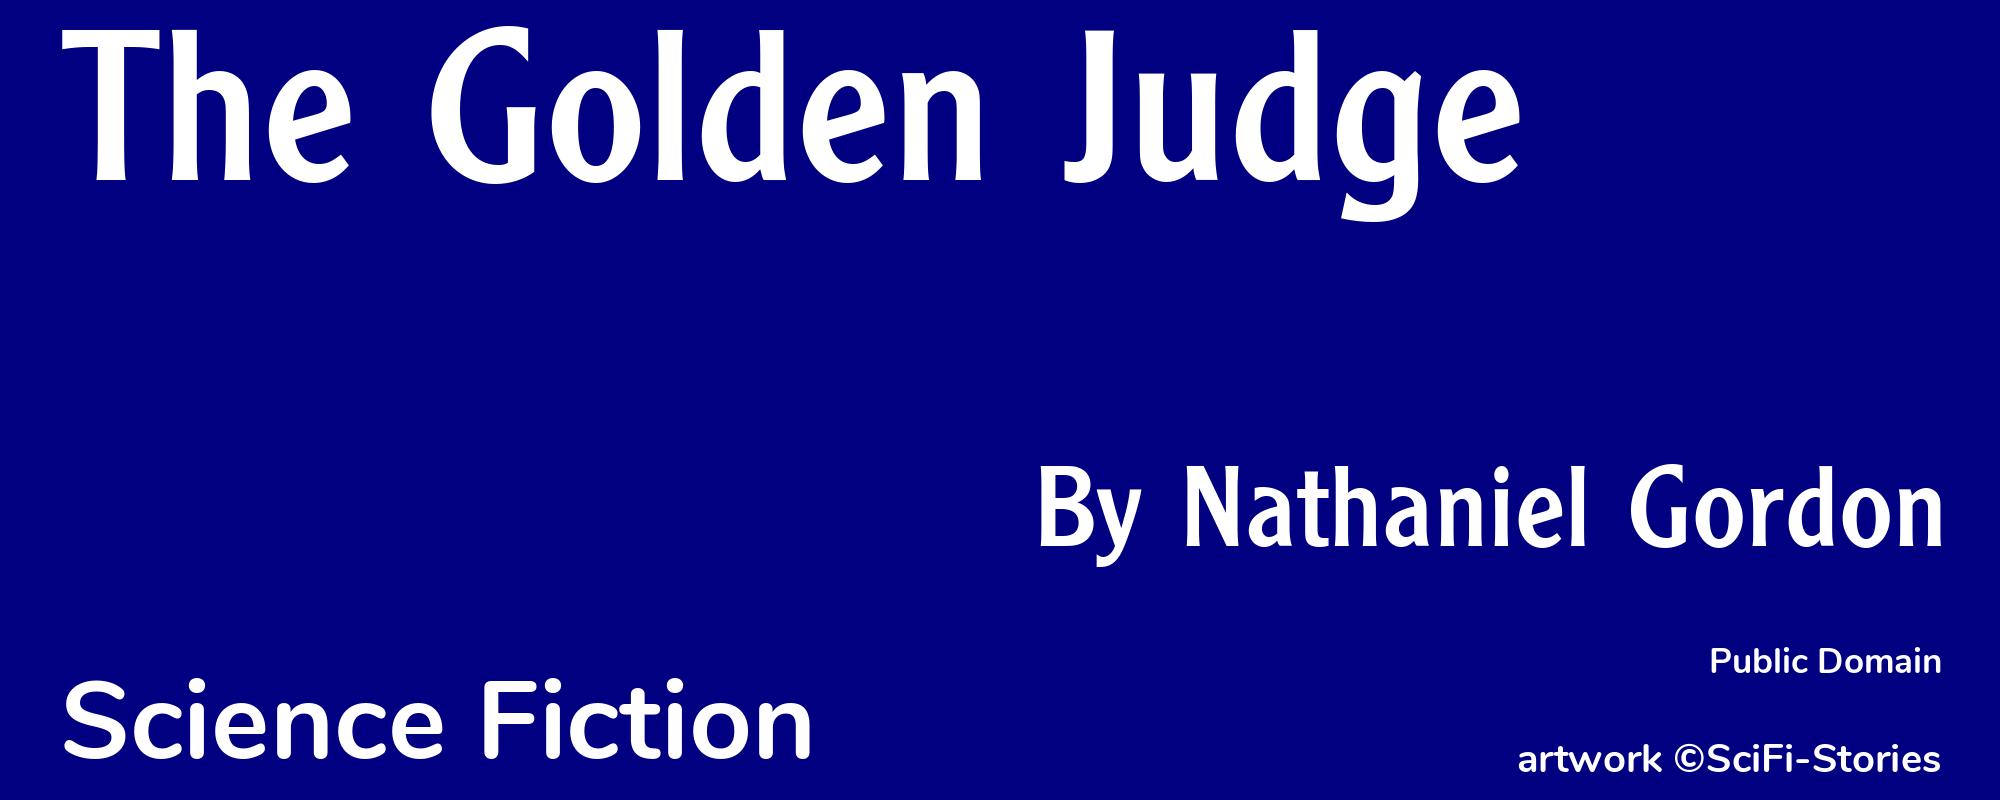 The Golden Judge - Cover